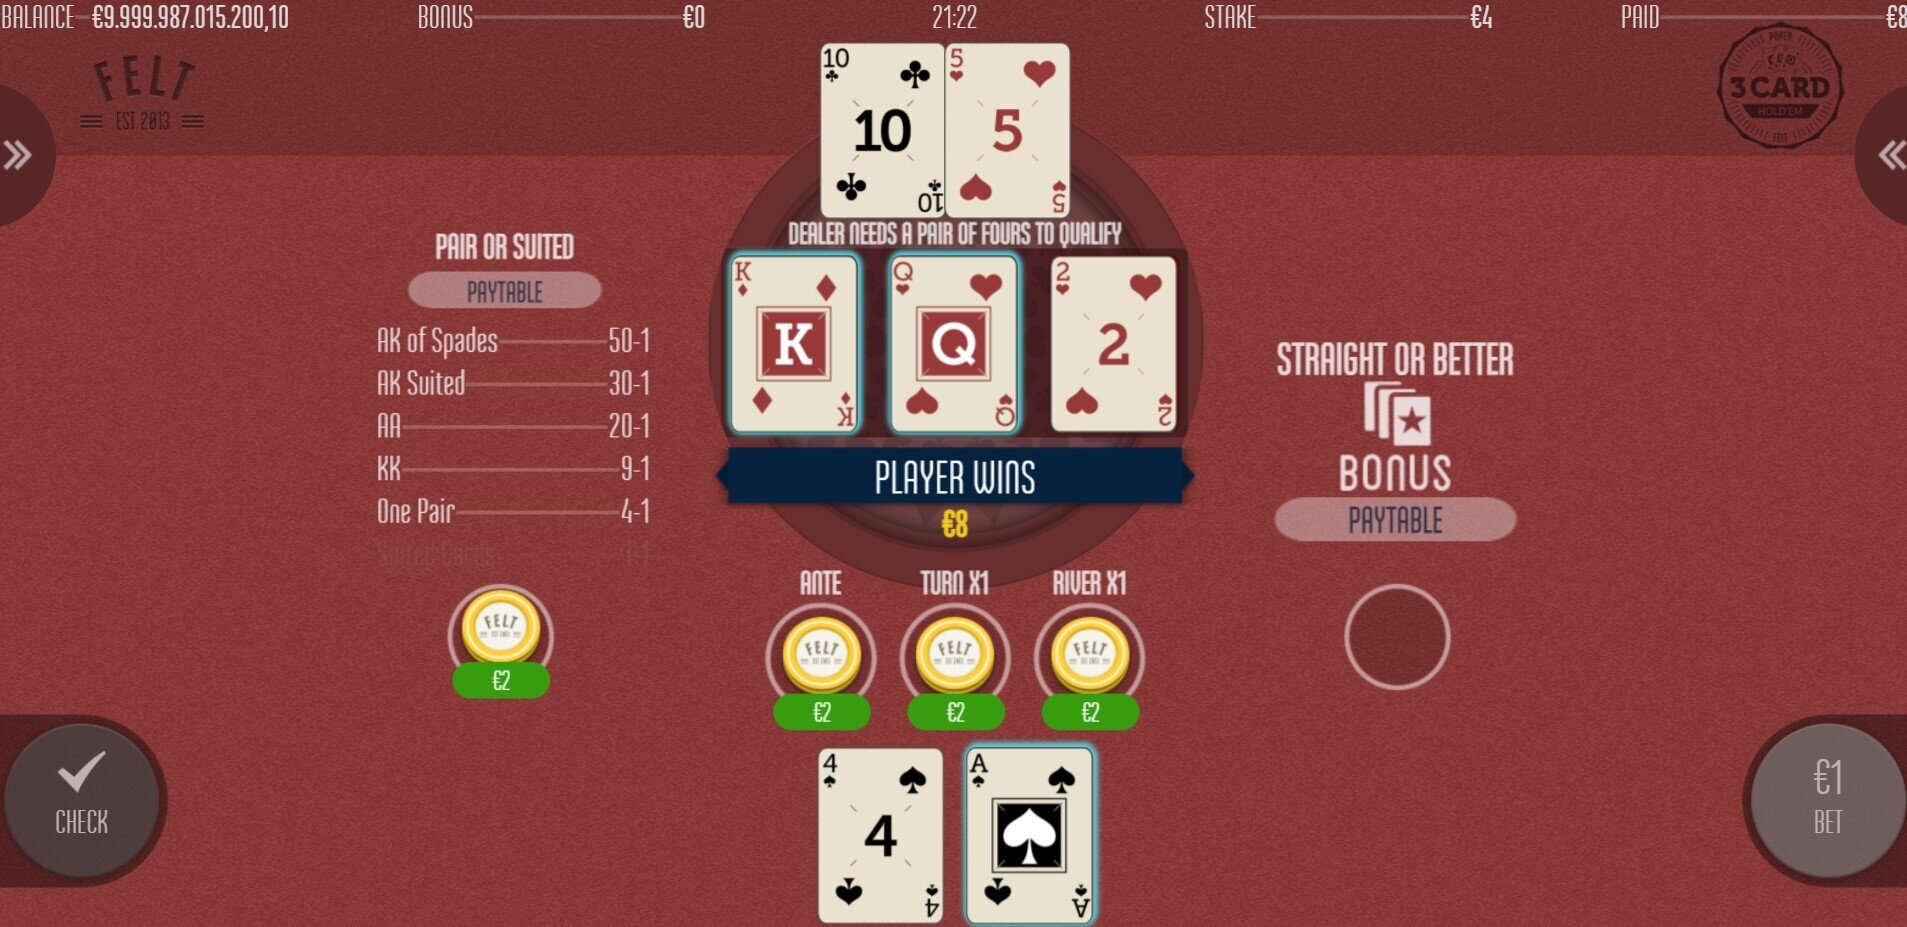 3 Card Hold'em Player Wins All